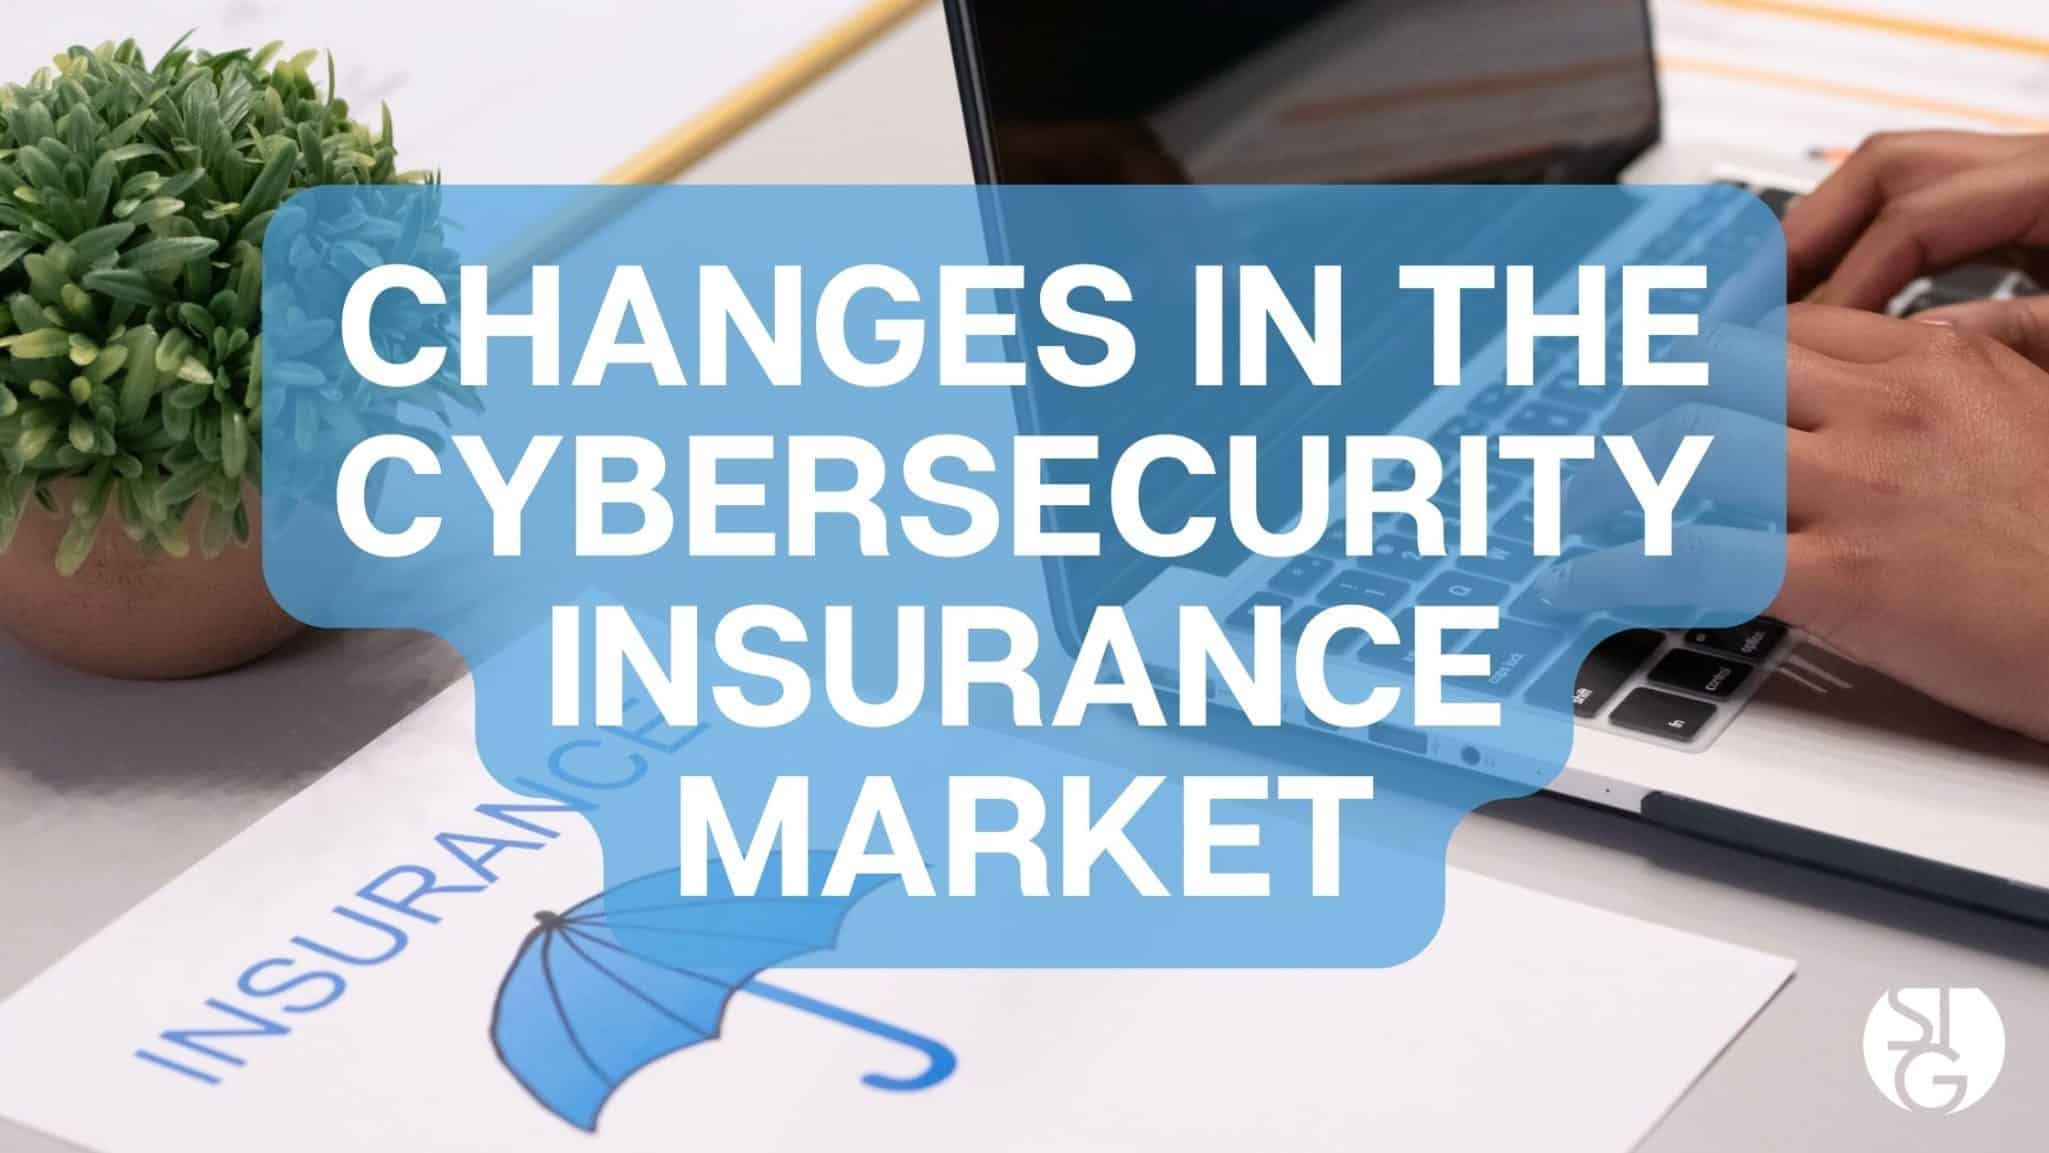 What's Different in the Cybersecurity Insurance Market?